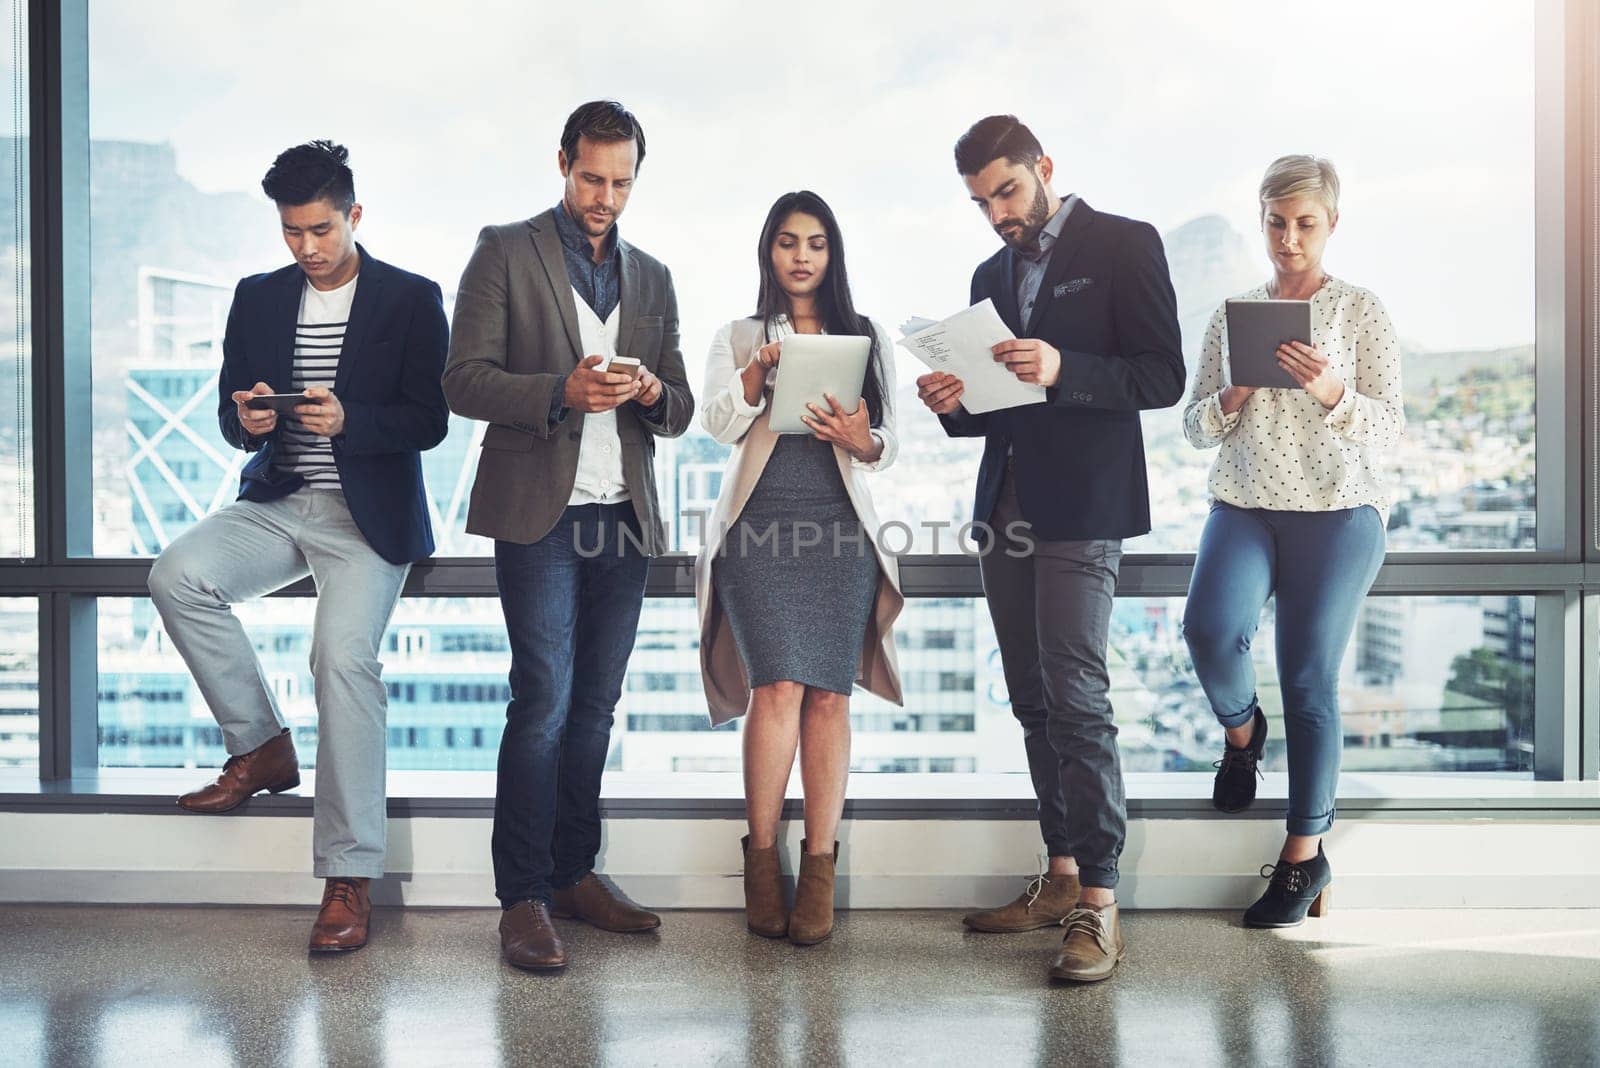 Keeping busy and focused on success. a diverse group of businesspeople using wireless technology in an office